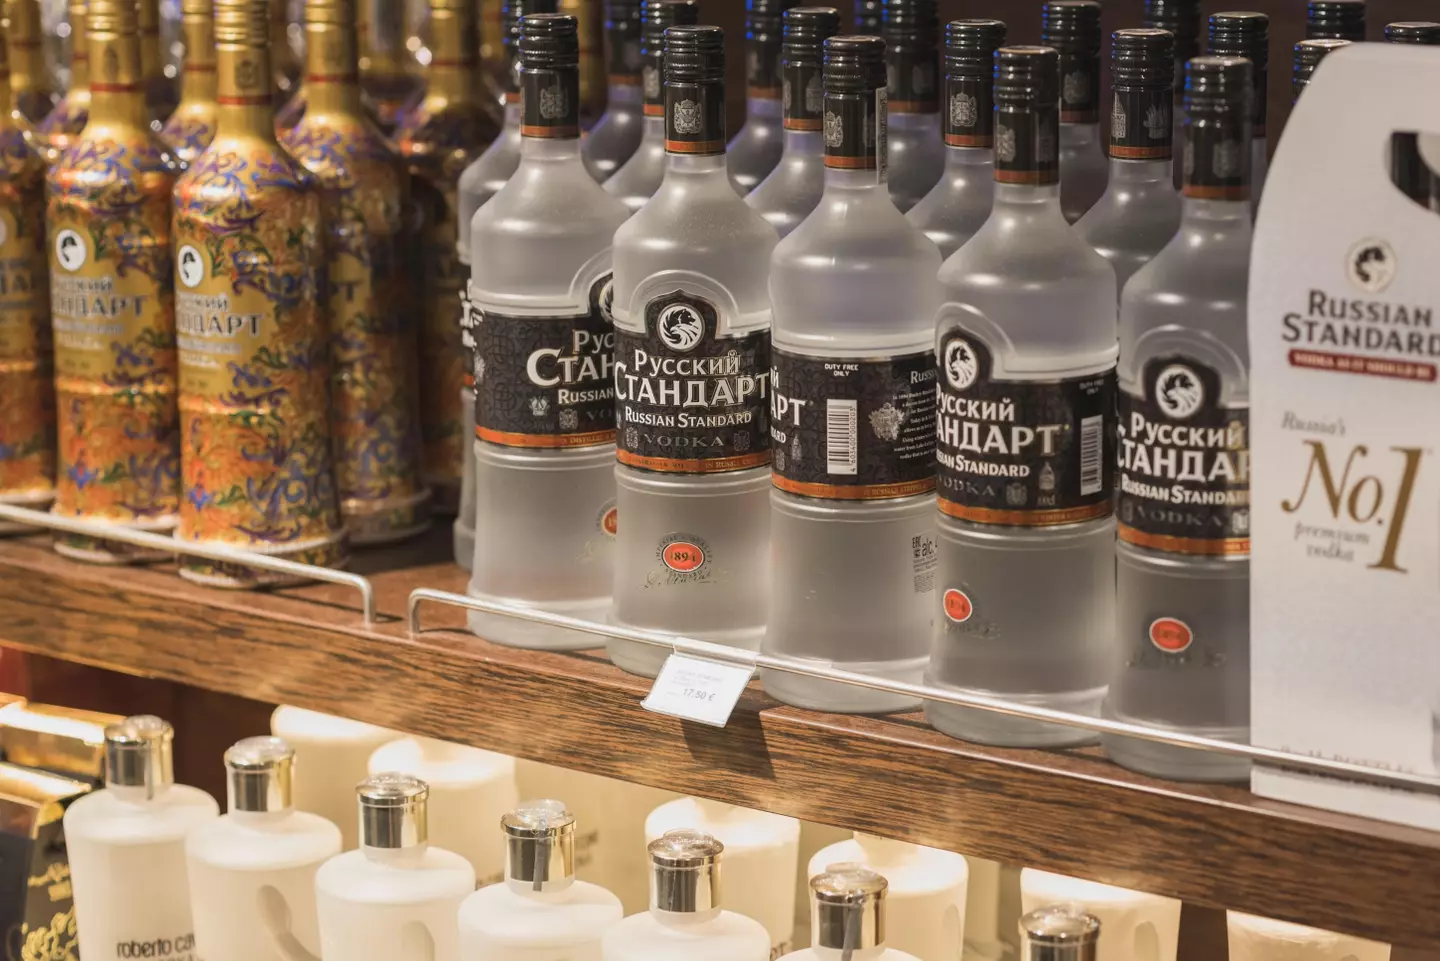 Russian Standard has already been removed from online sale.